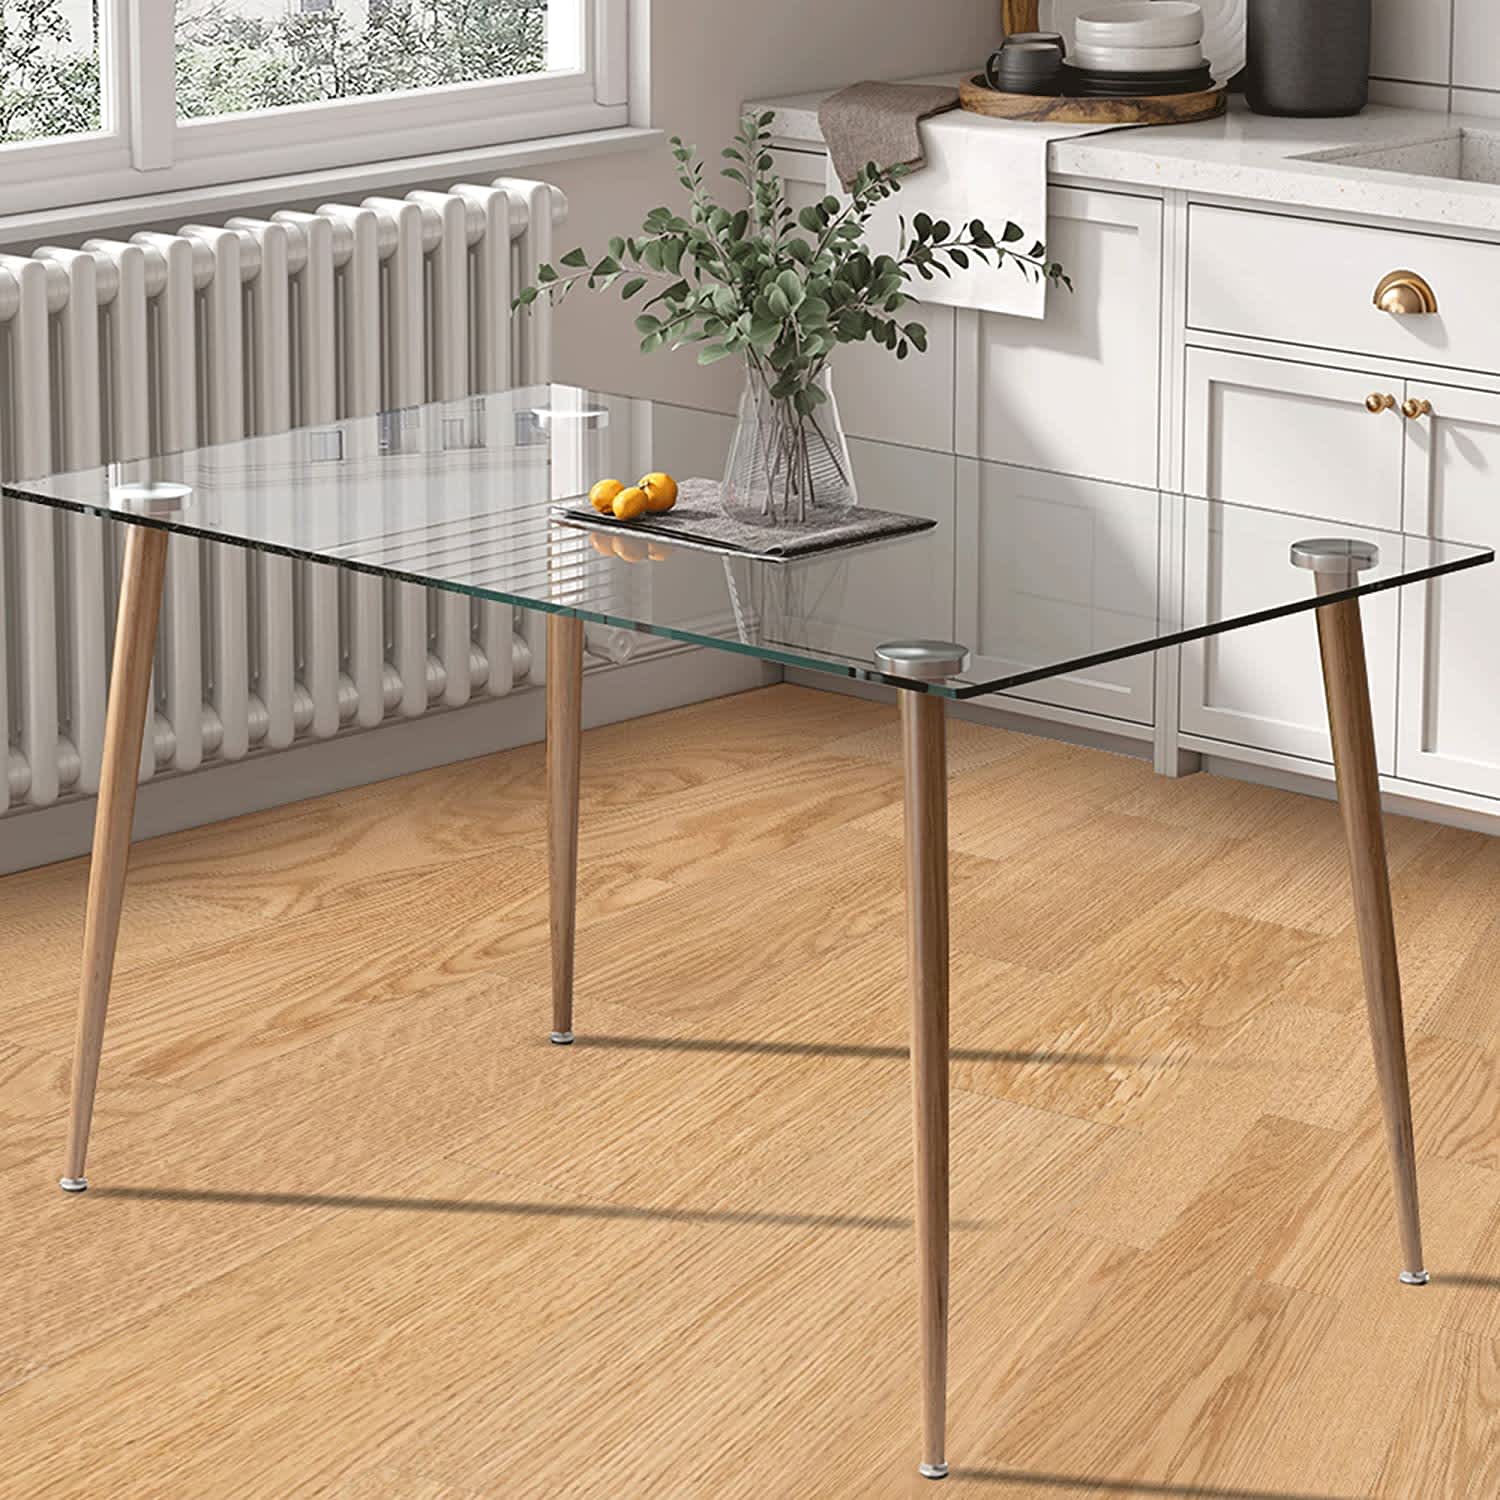 Glass Dining Table Design 2022 - Glass Dining Table Set 2022 